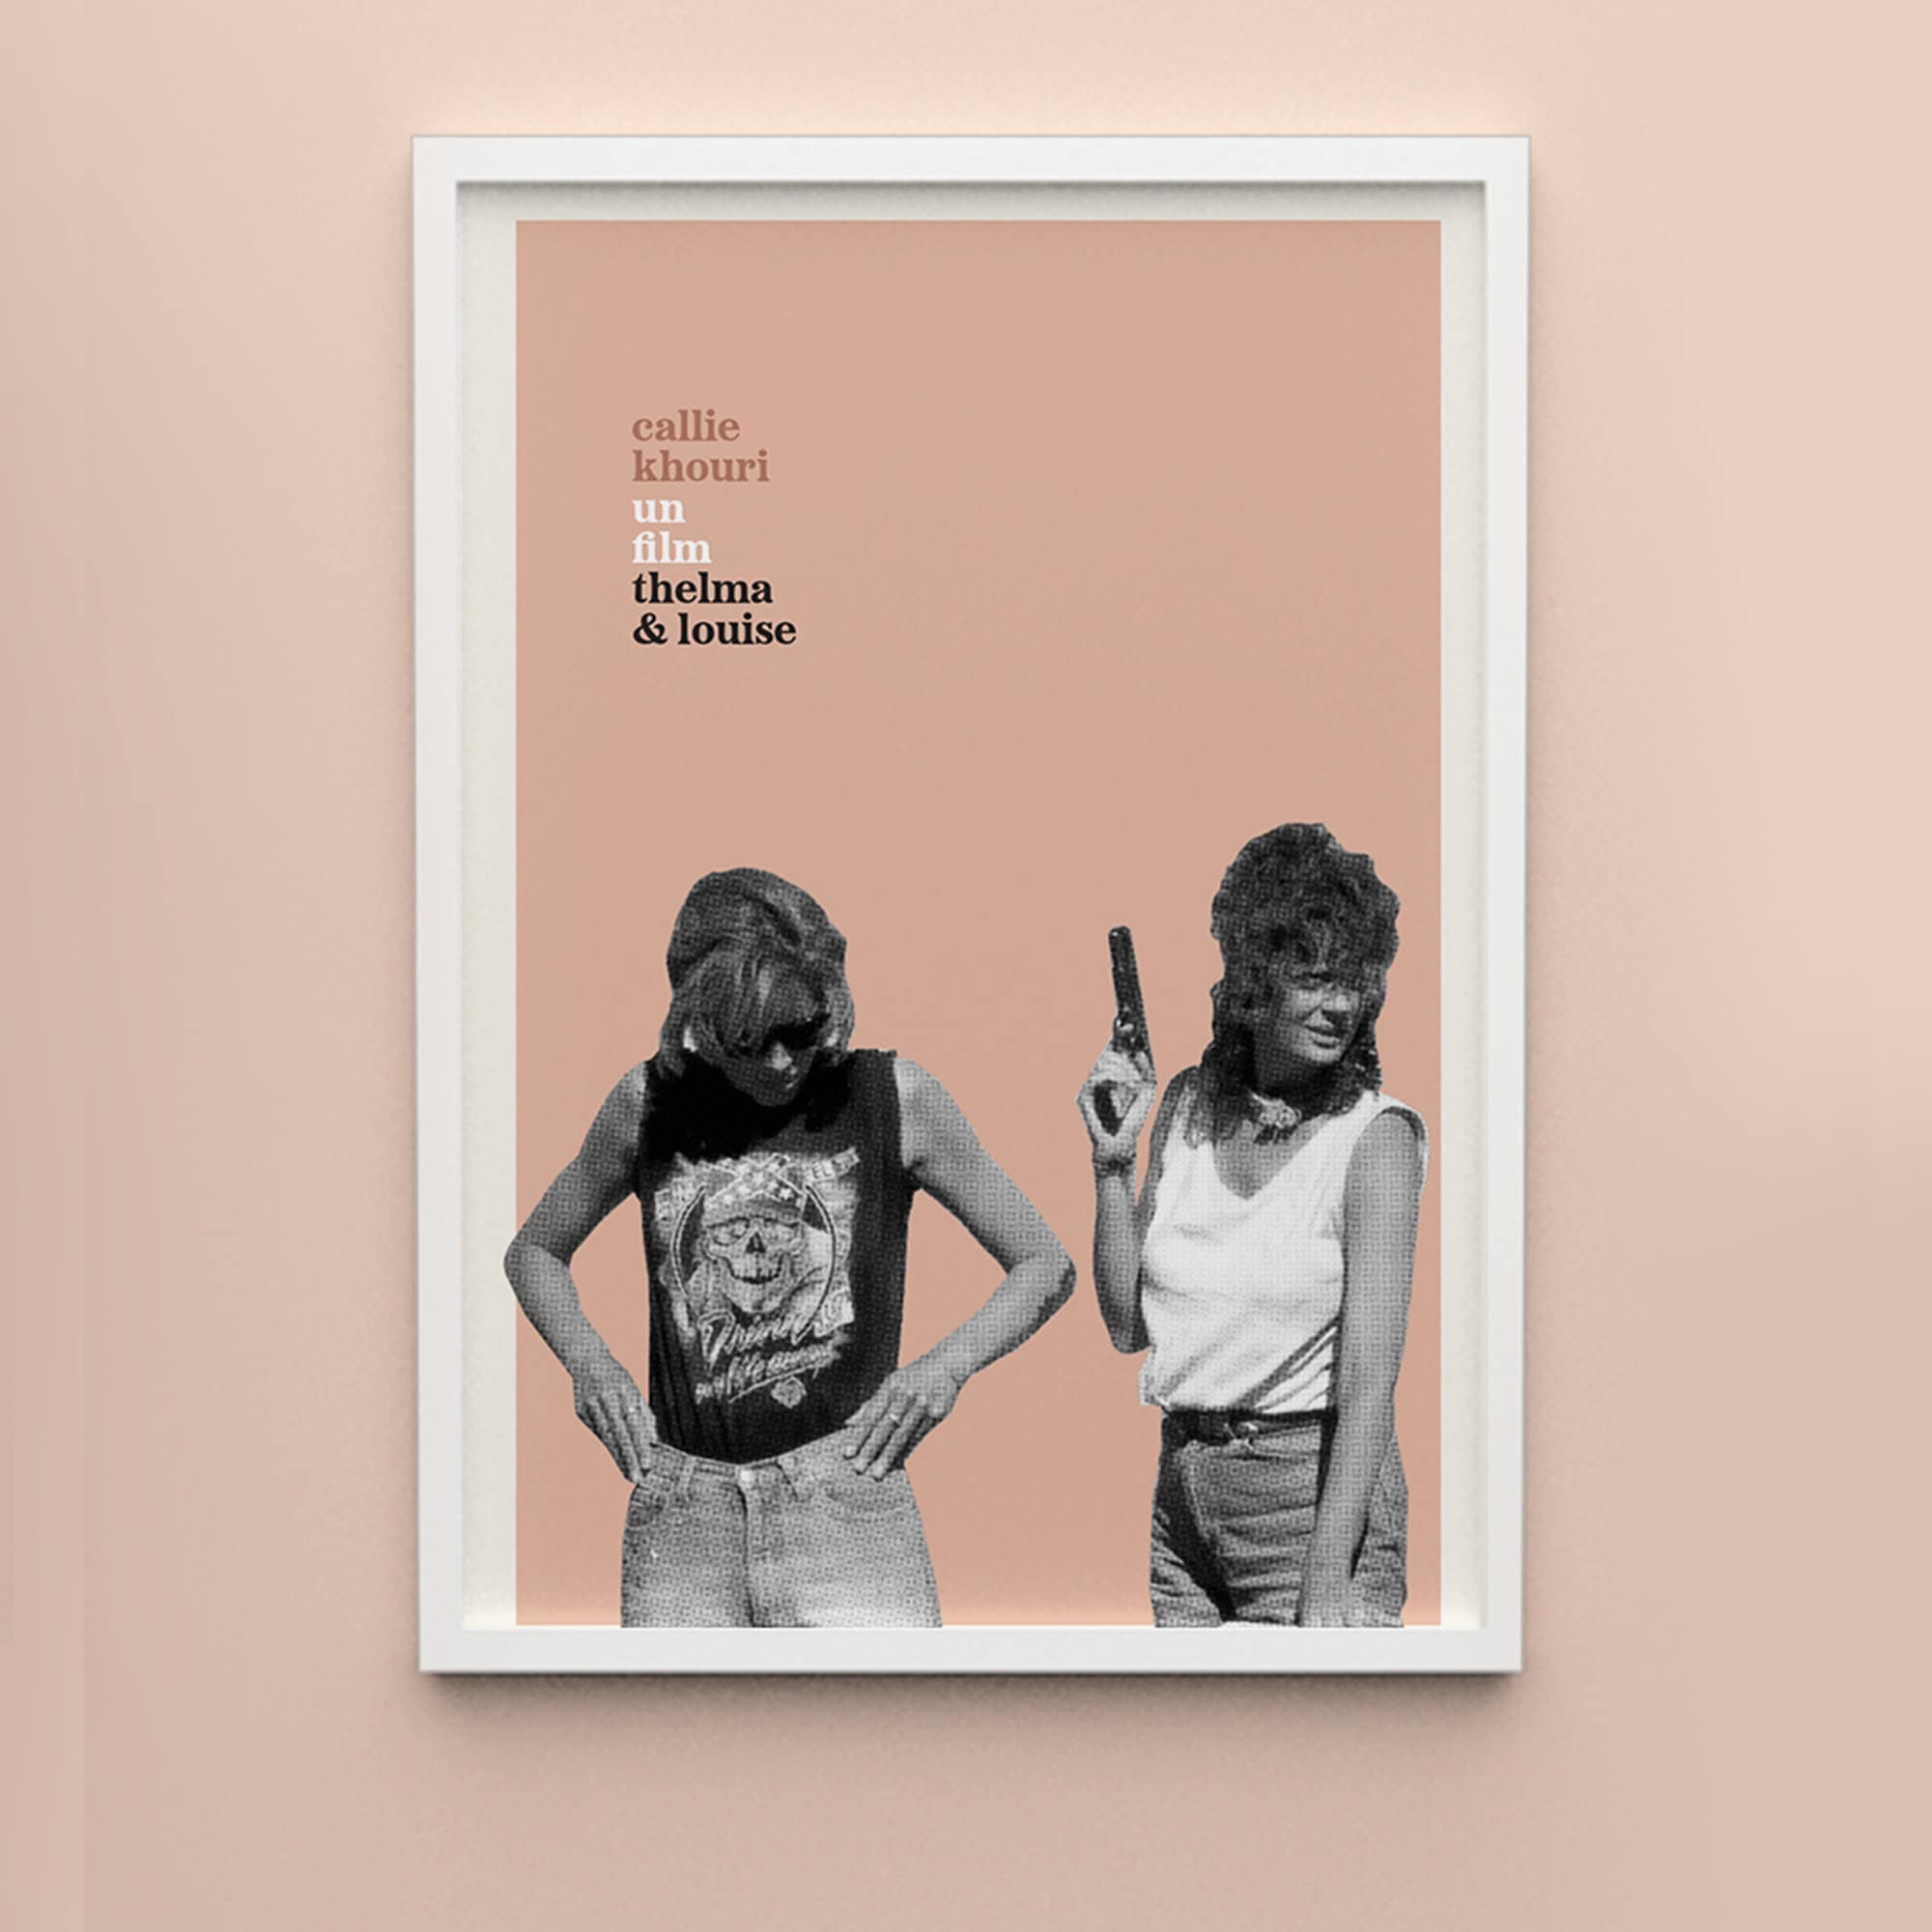 Wall Art Print Thelma and Louise, Gifts & Merchandise